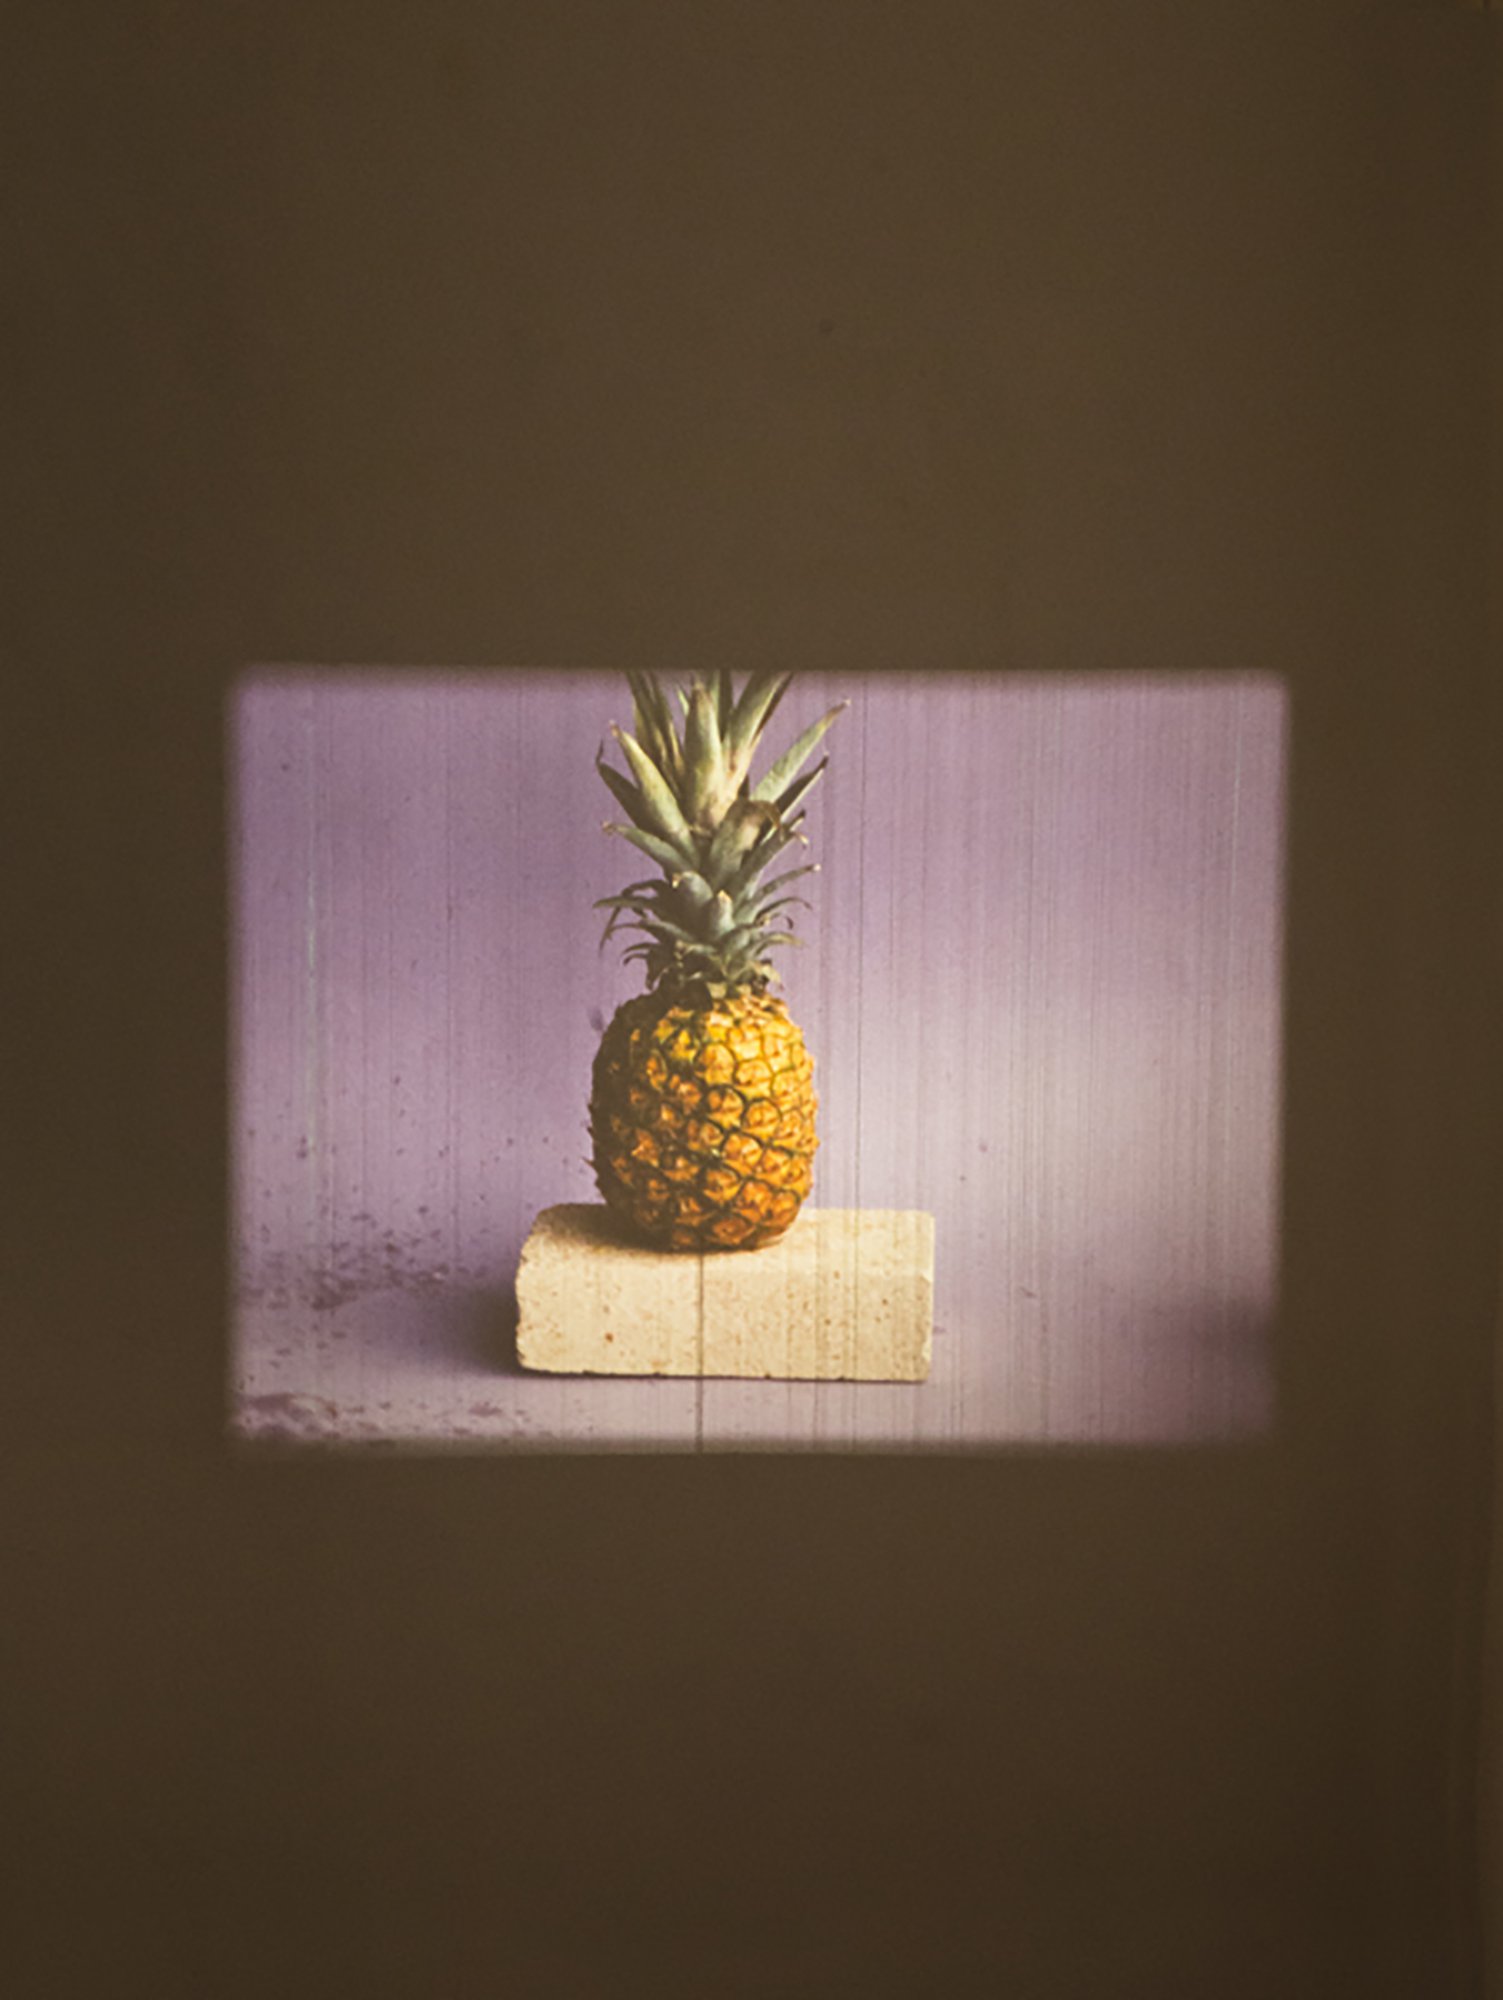 Tamara Henderson, Accent Grave on Ananas, 16 mm color film on loop with optical sound, 2 min. 44 sec., 2013